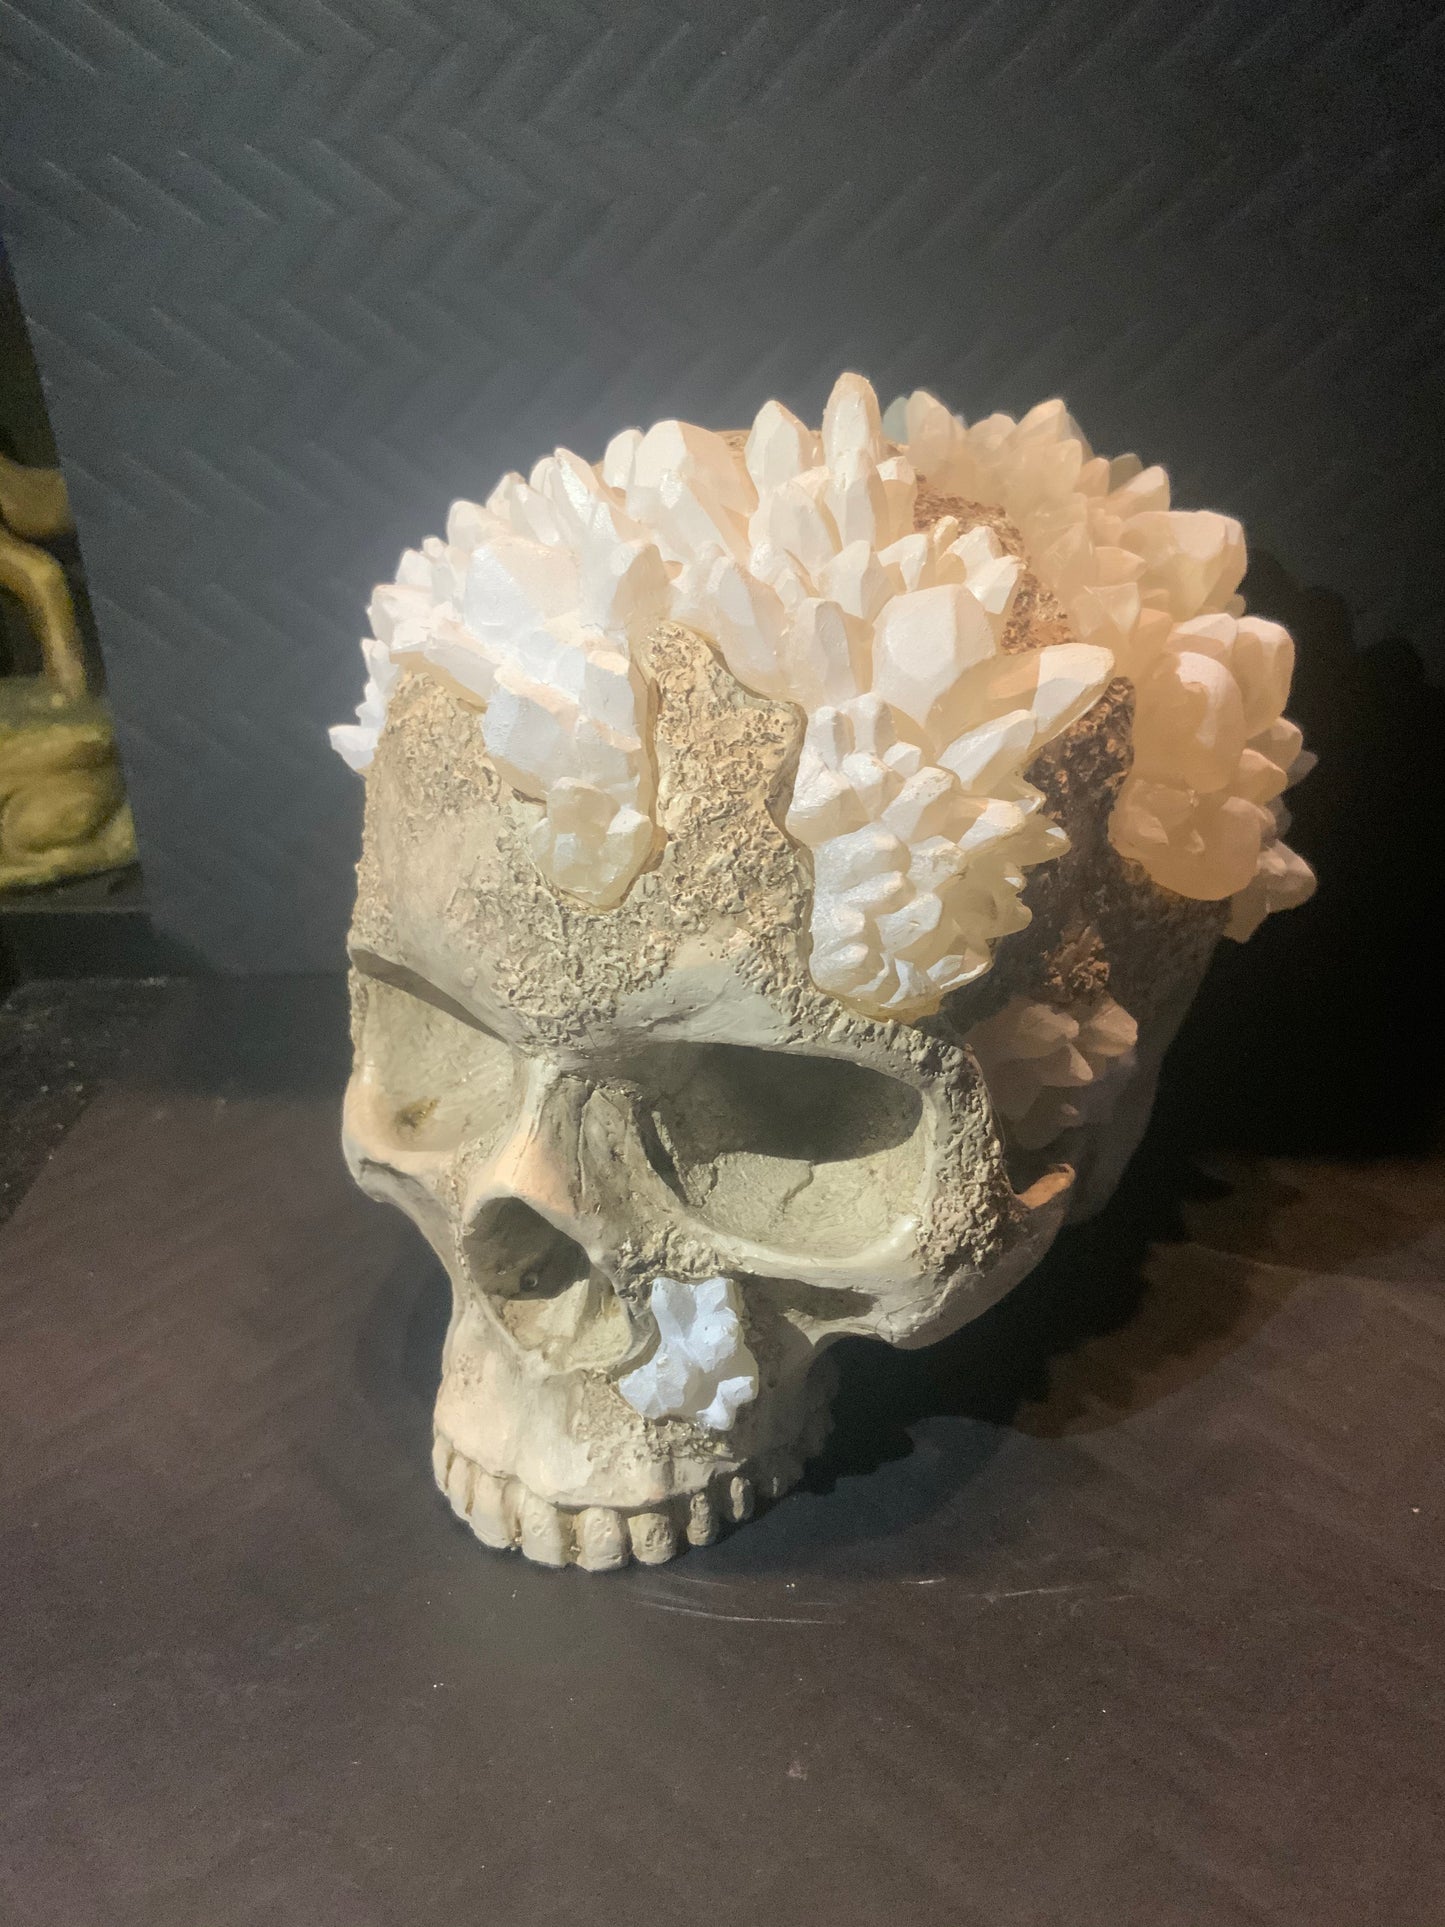 Life size human skull replica with crystal